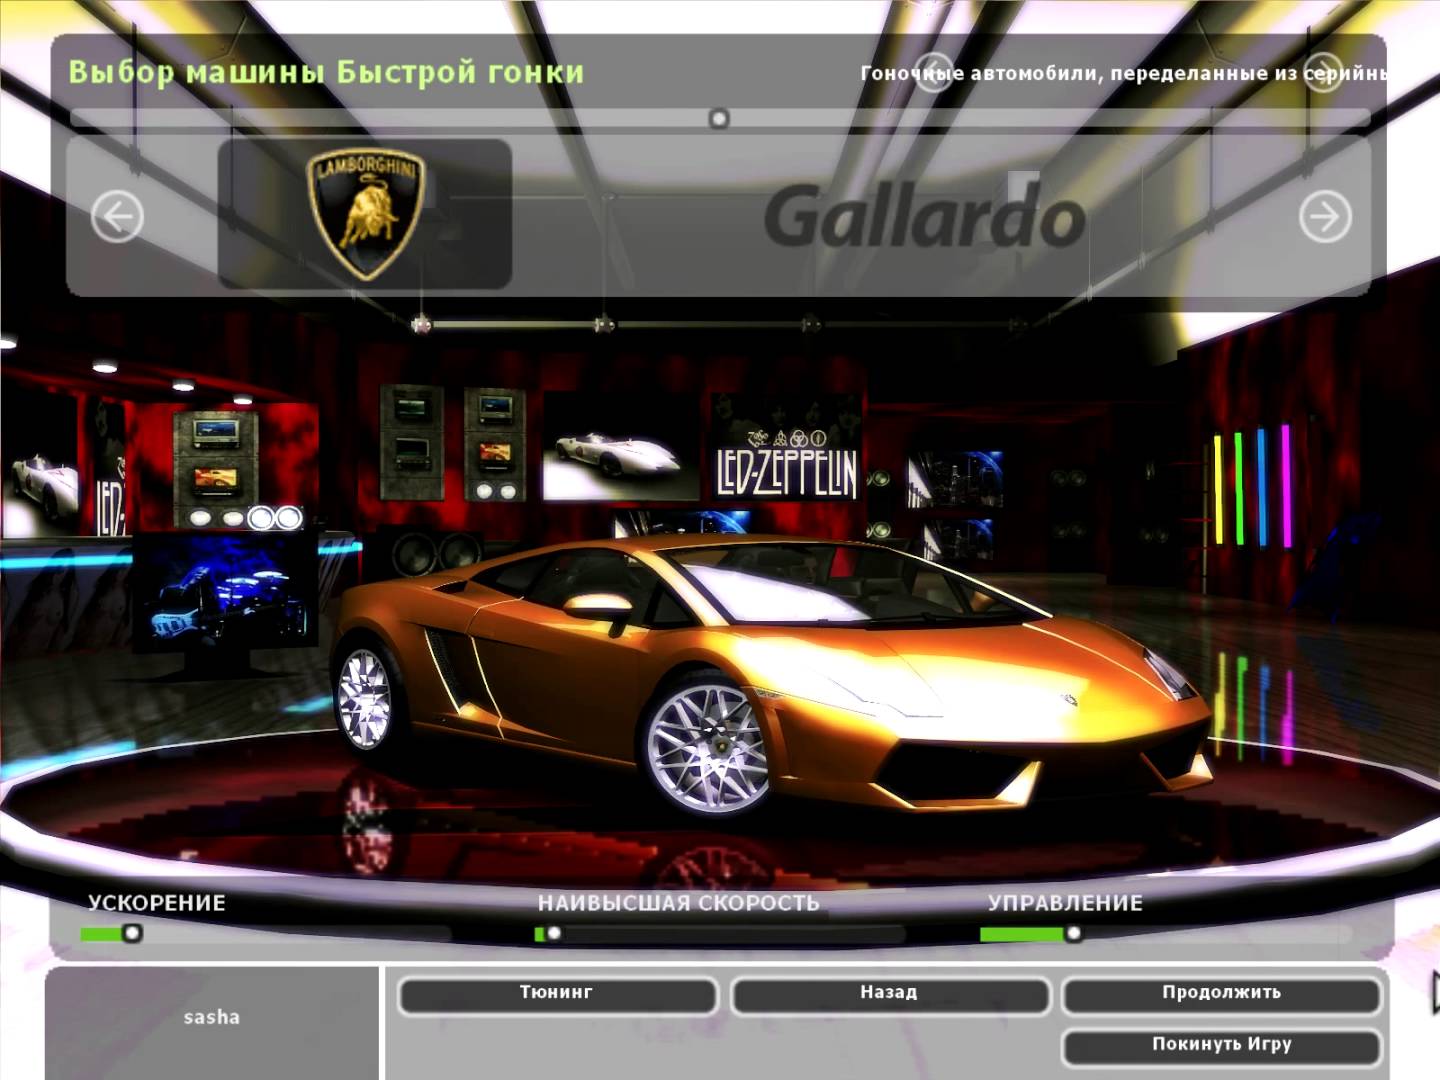 Need for speed underground free download full version filehippo